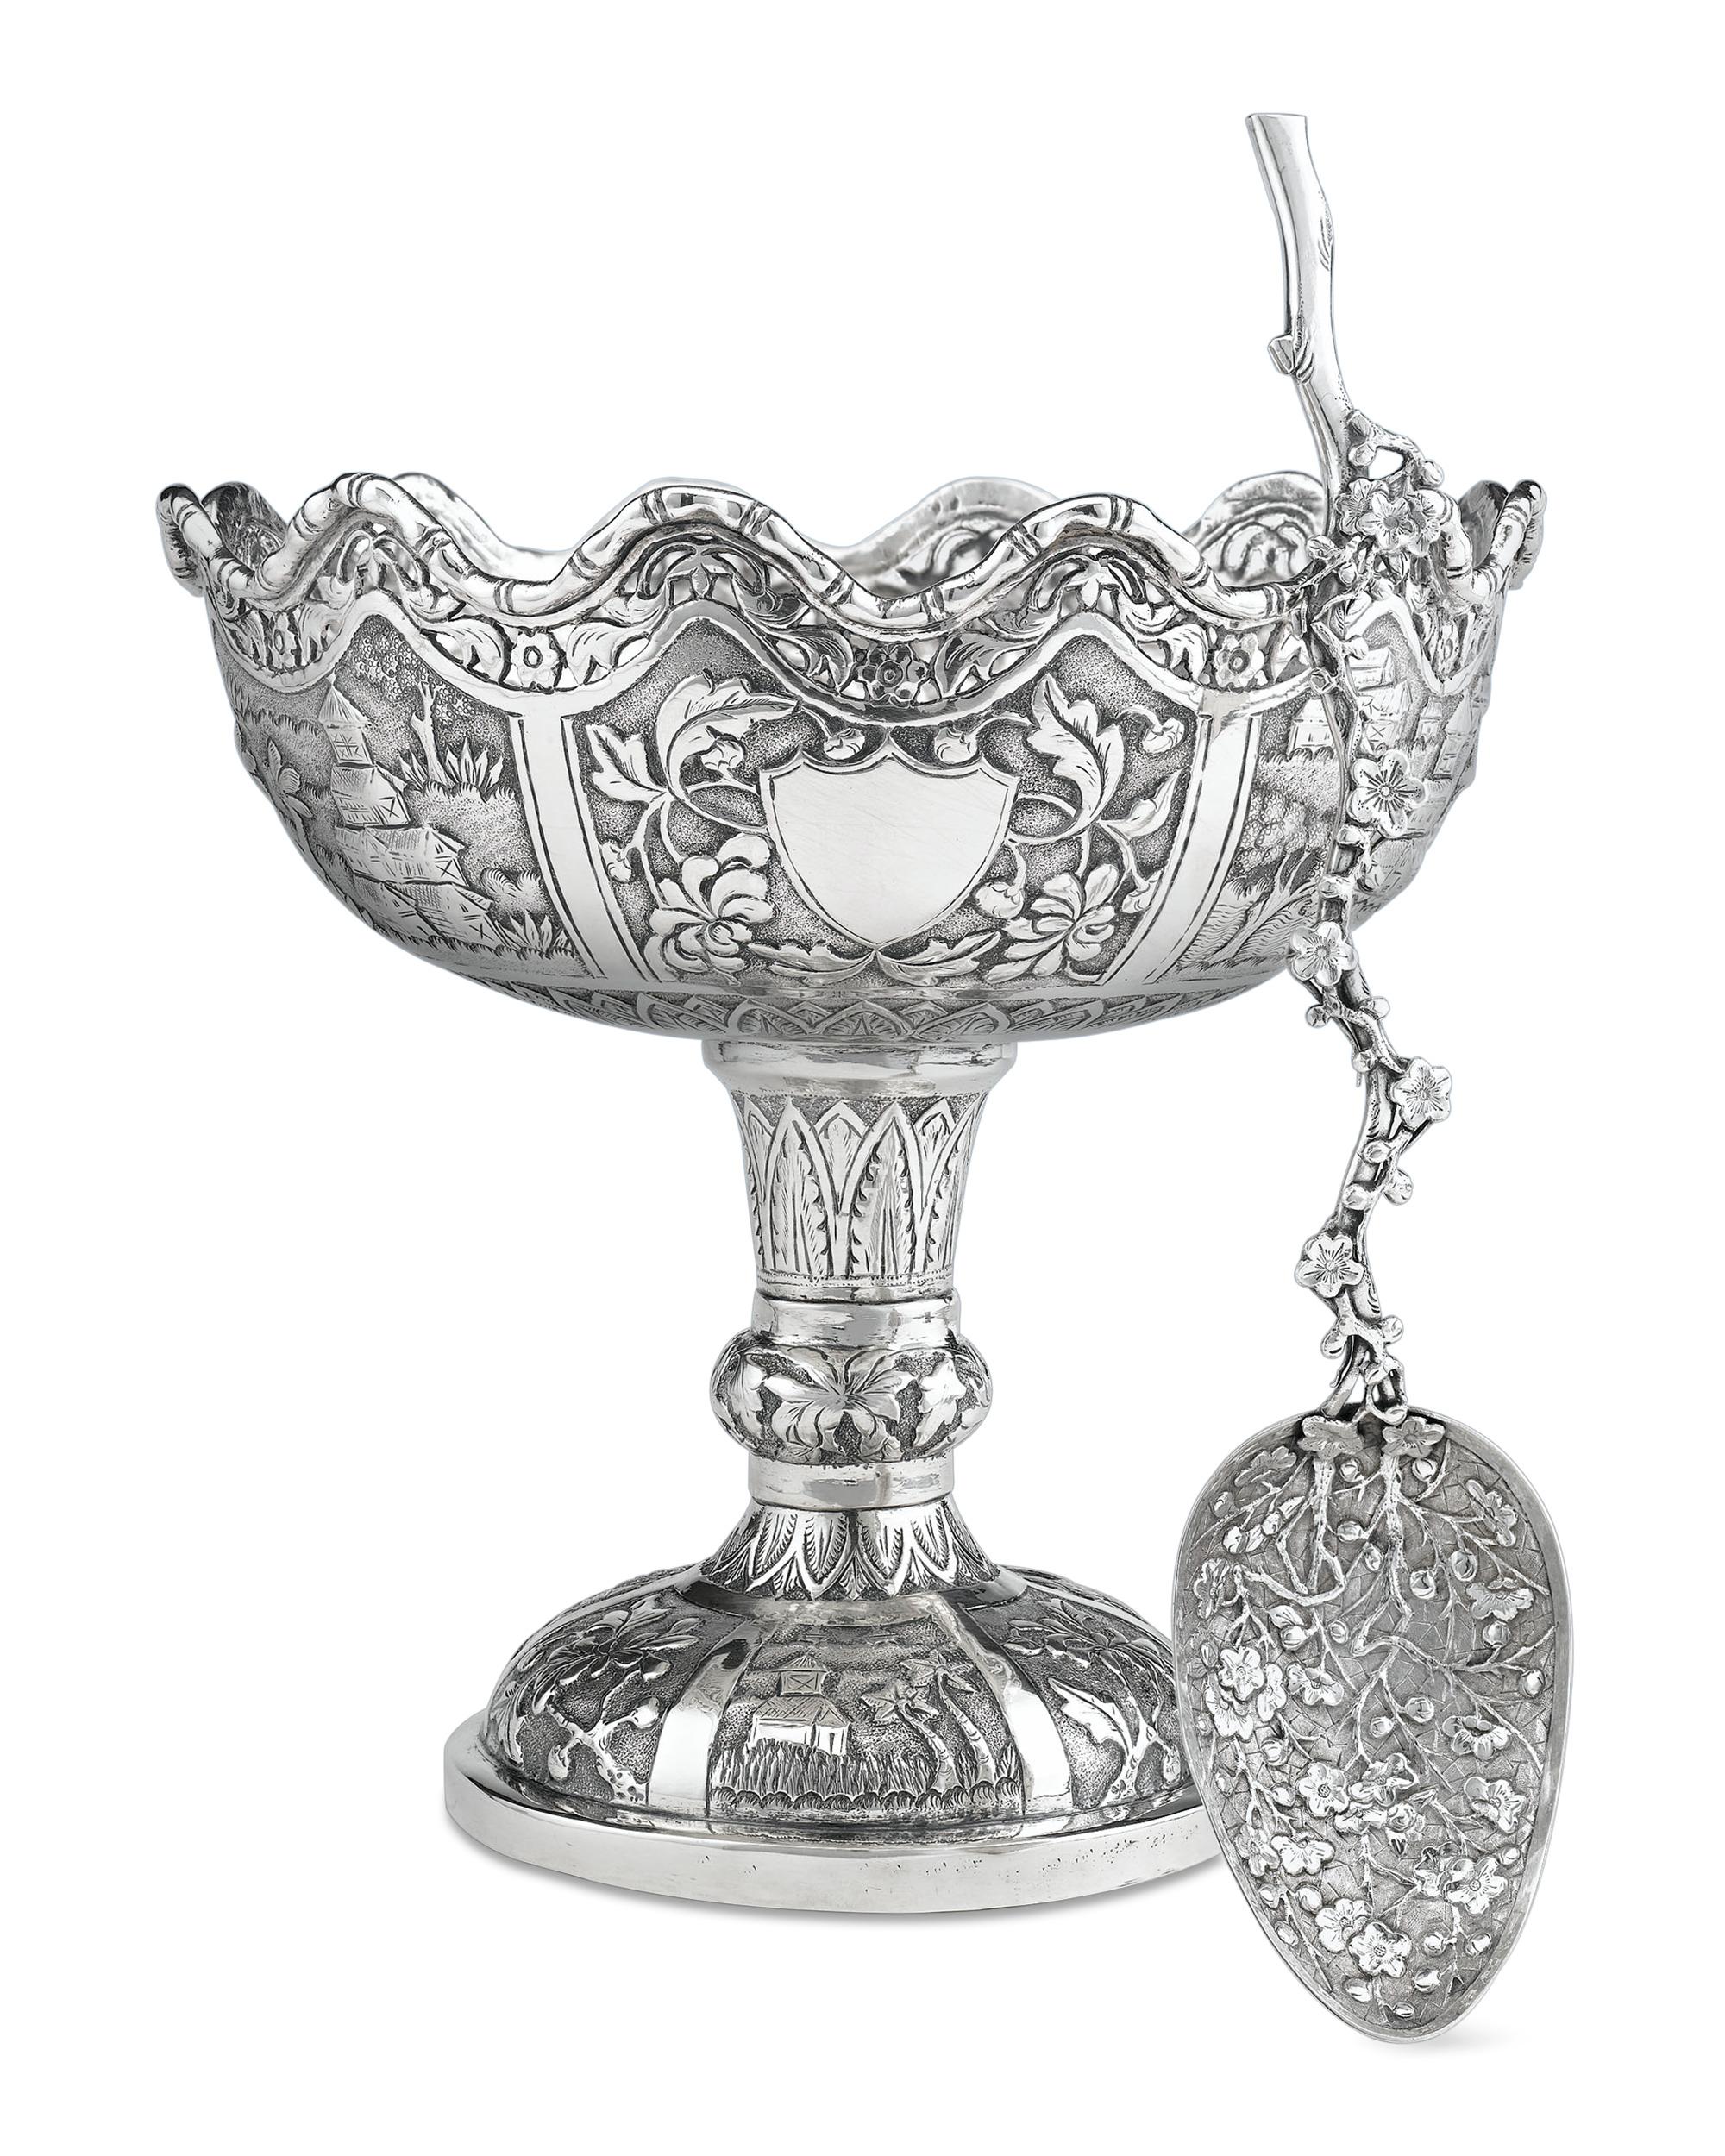 This delightful and extremely rare spoon and bowl pair exemplifies the remarkable artistry of Chinese export silver. Chinese silver pieces are renowned for their exceptional quality and unique designs, and the majority are entirely hand crafted.